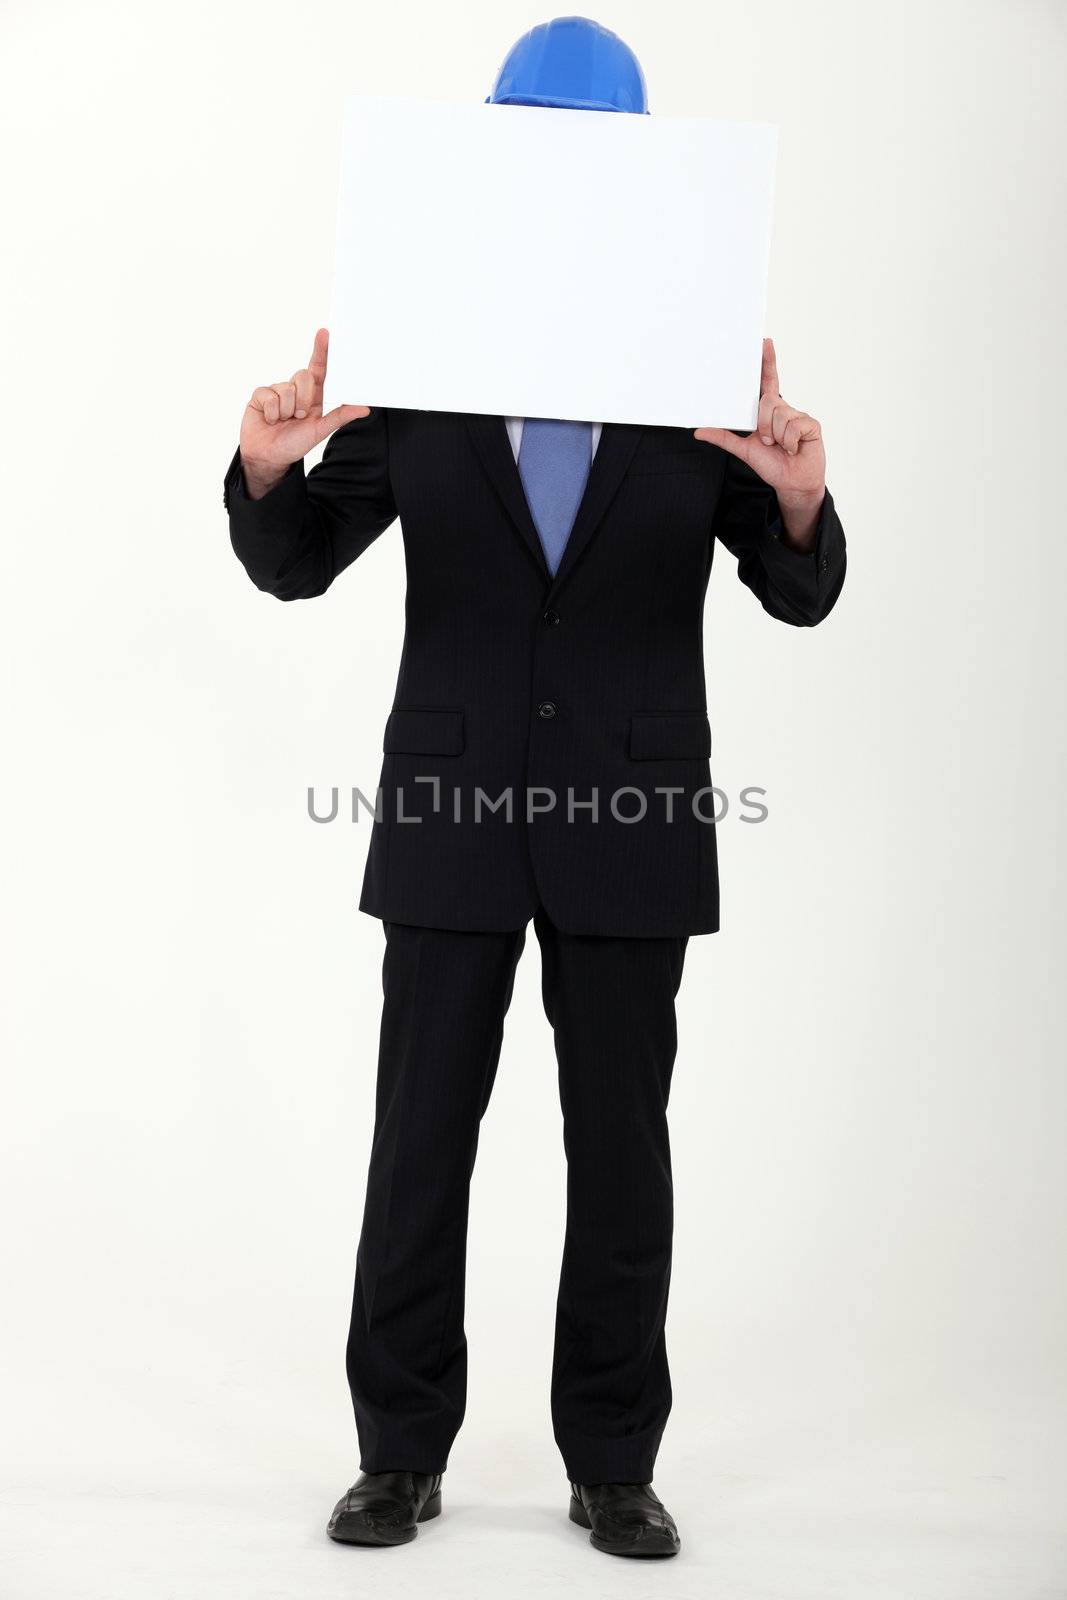 Engineer holding up a blank sign before his face by phovoir